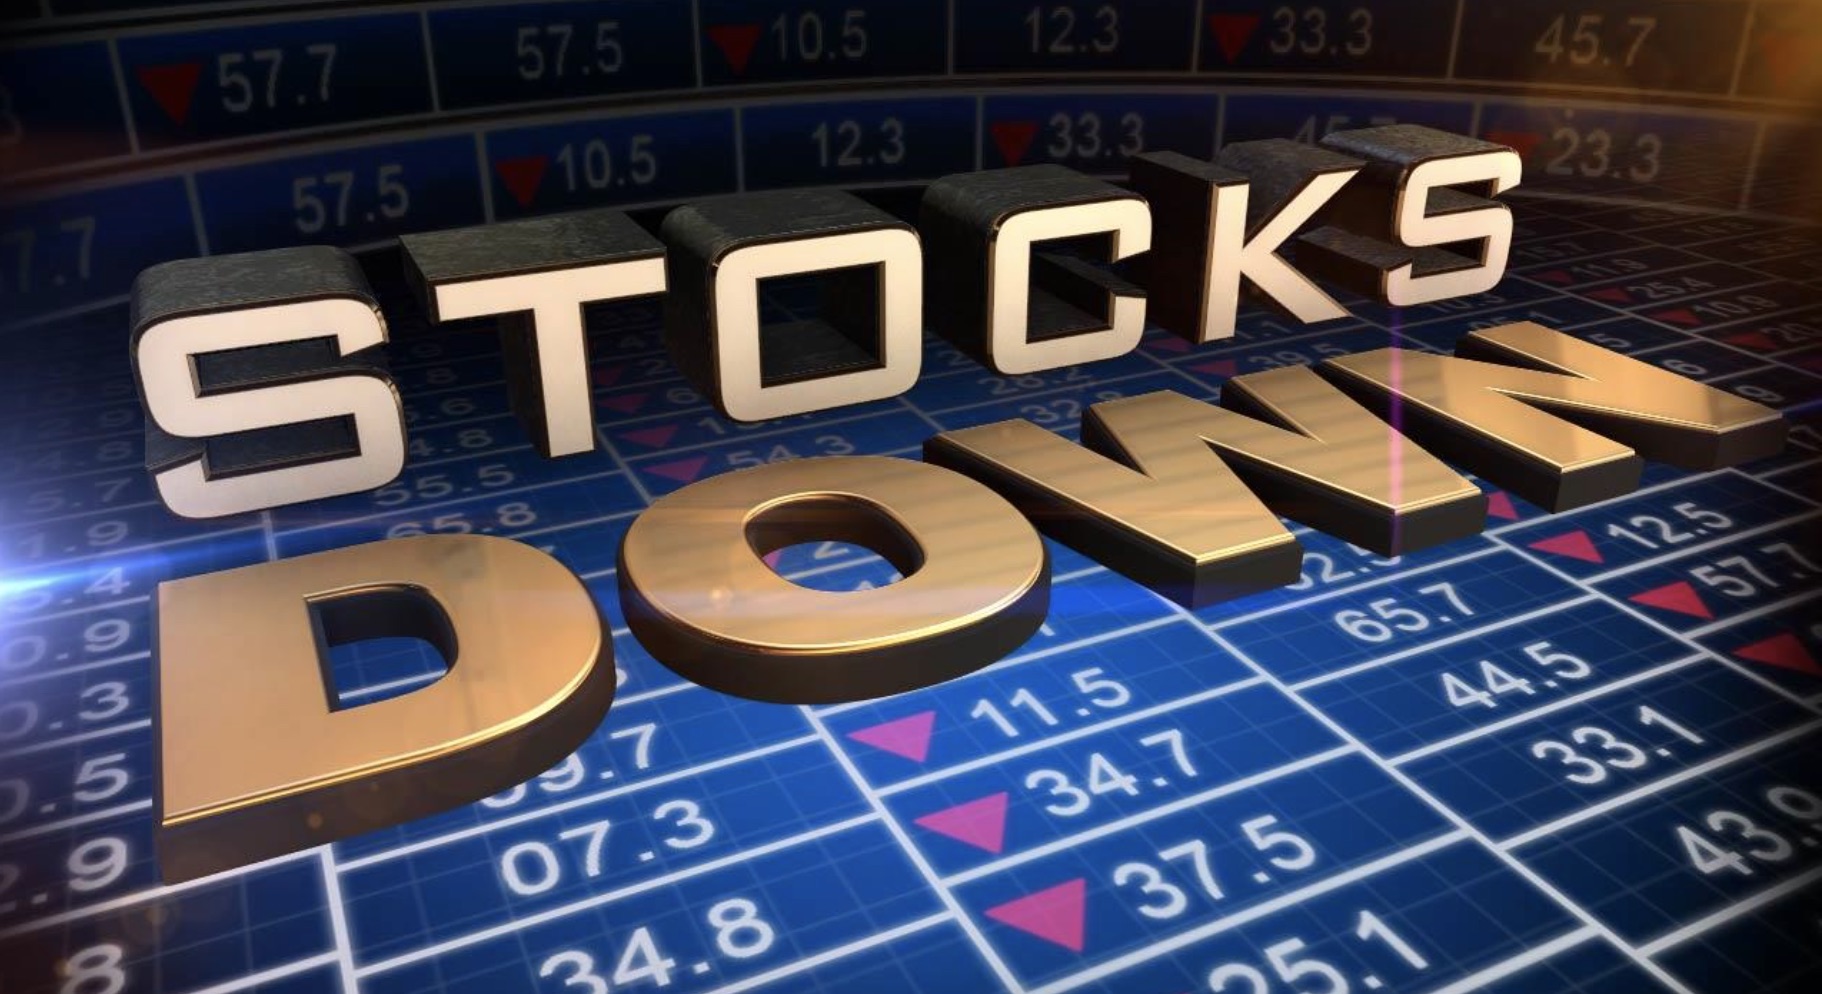 King World News - Analyst Warns The Decline In Stocks Is Going To Be Sharp